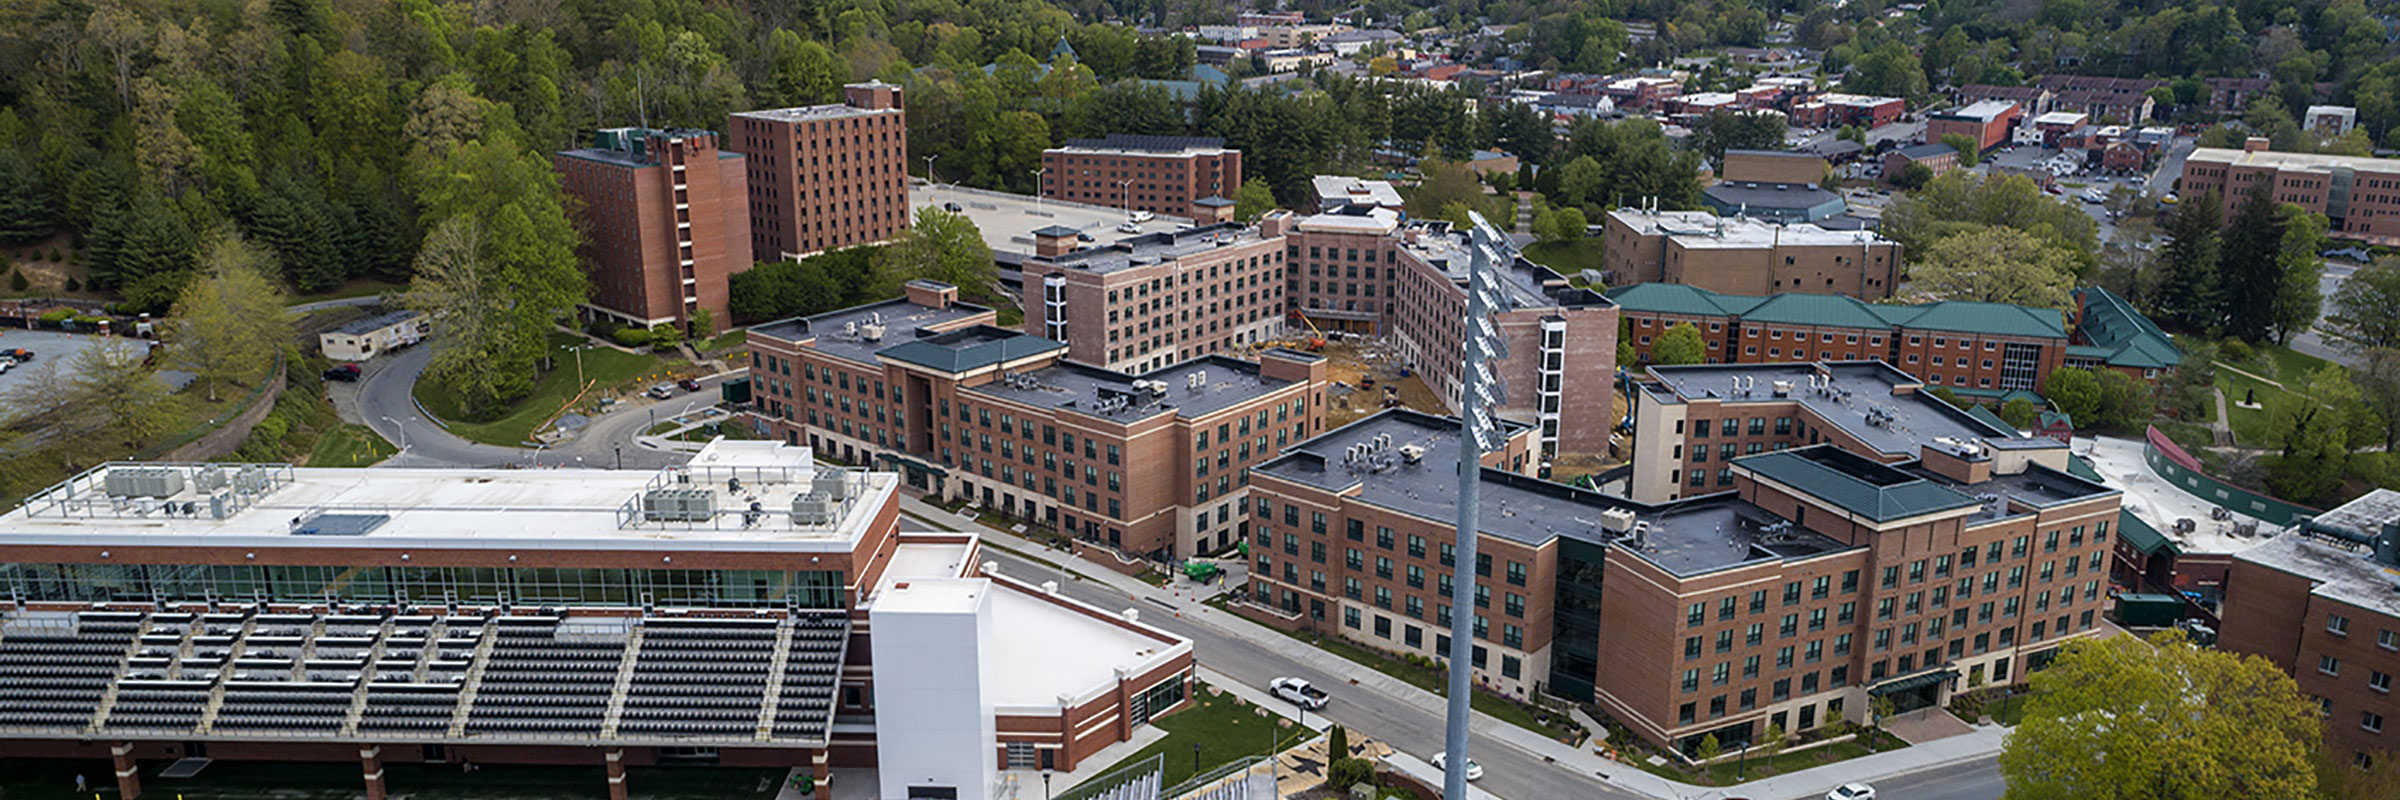 Drone view of residence halls